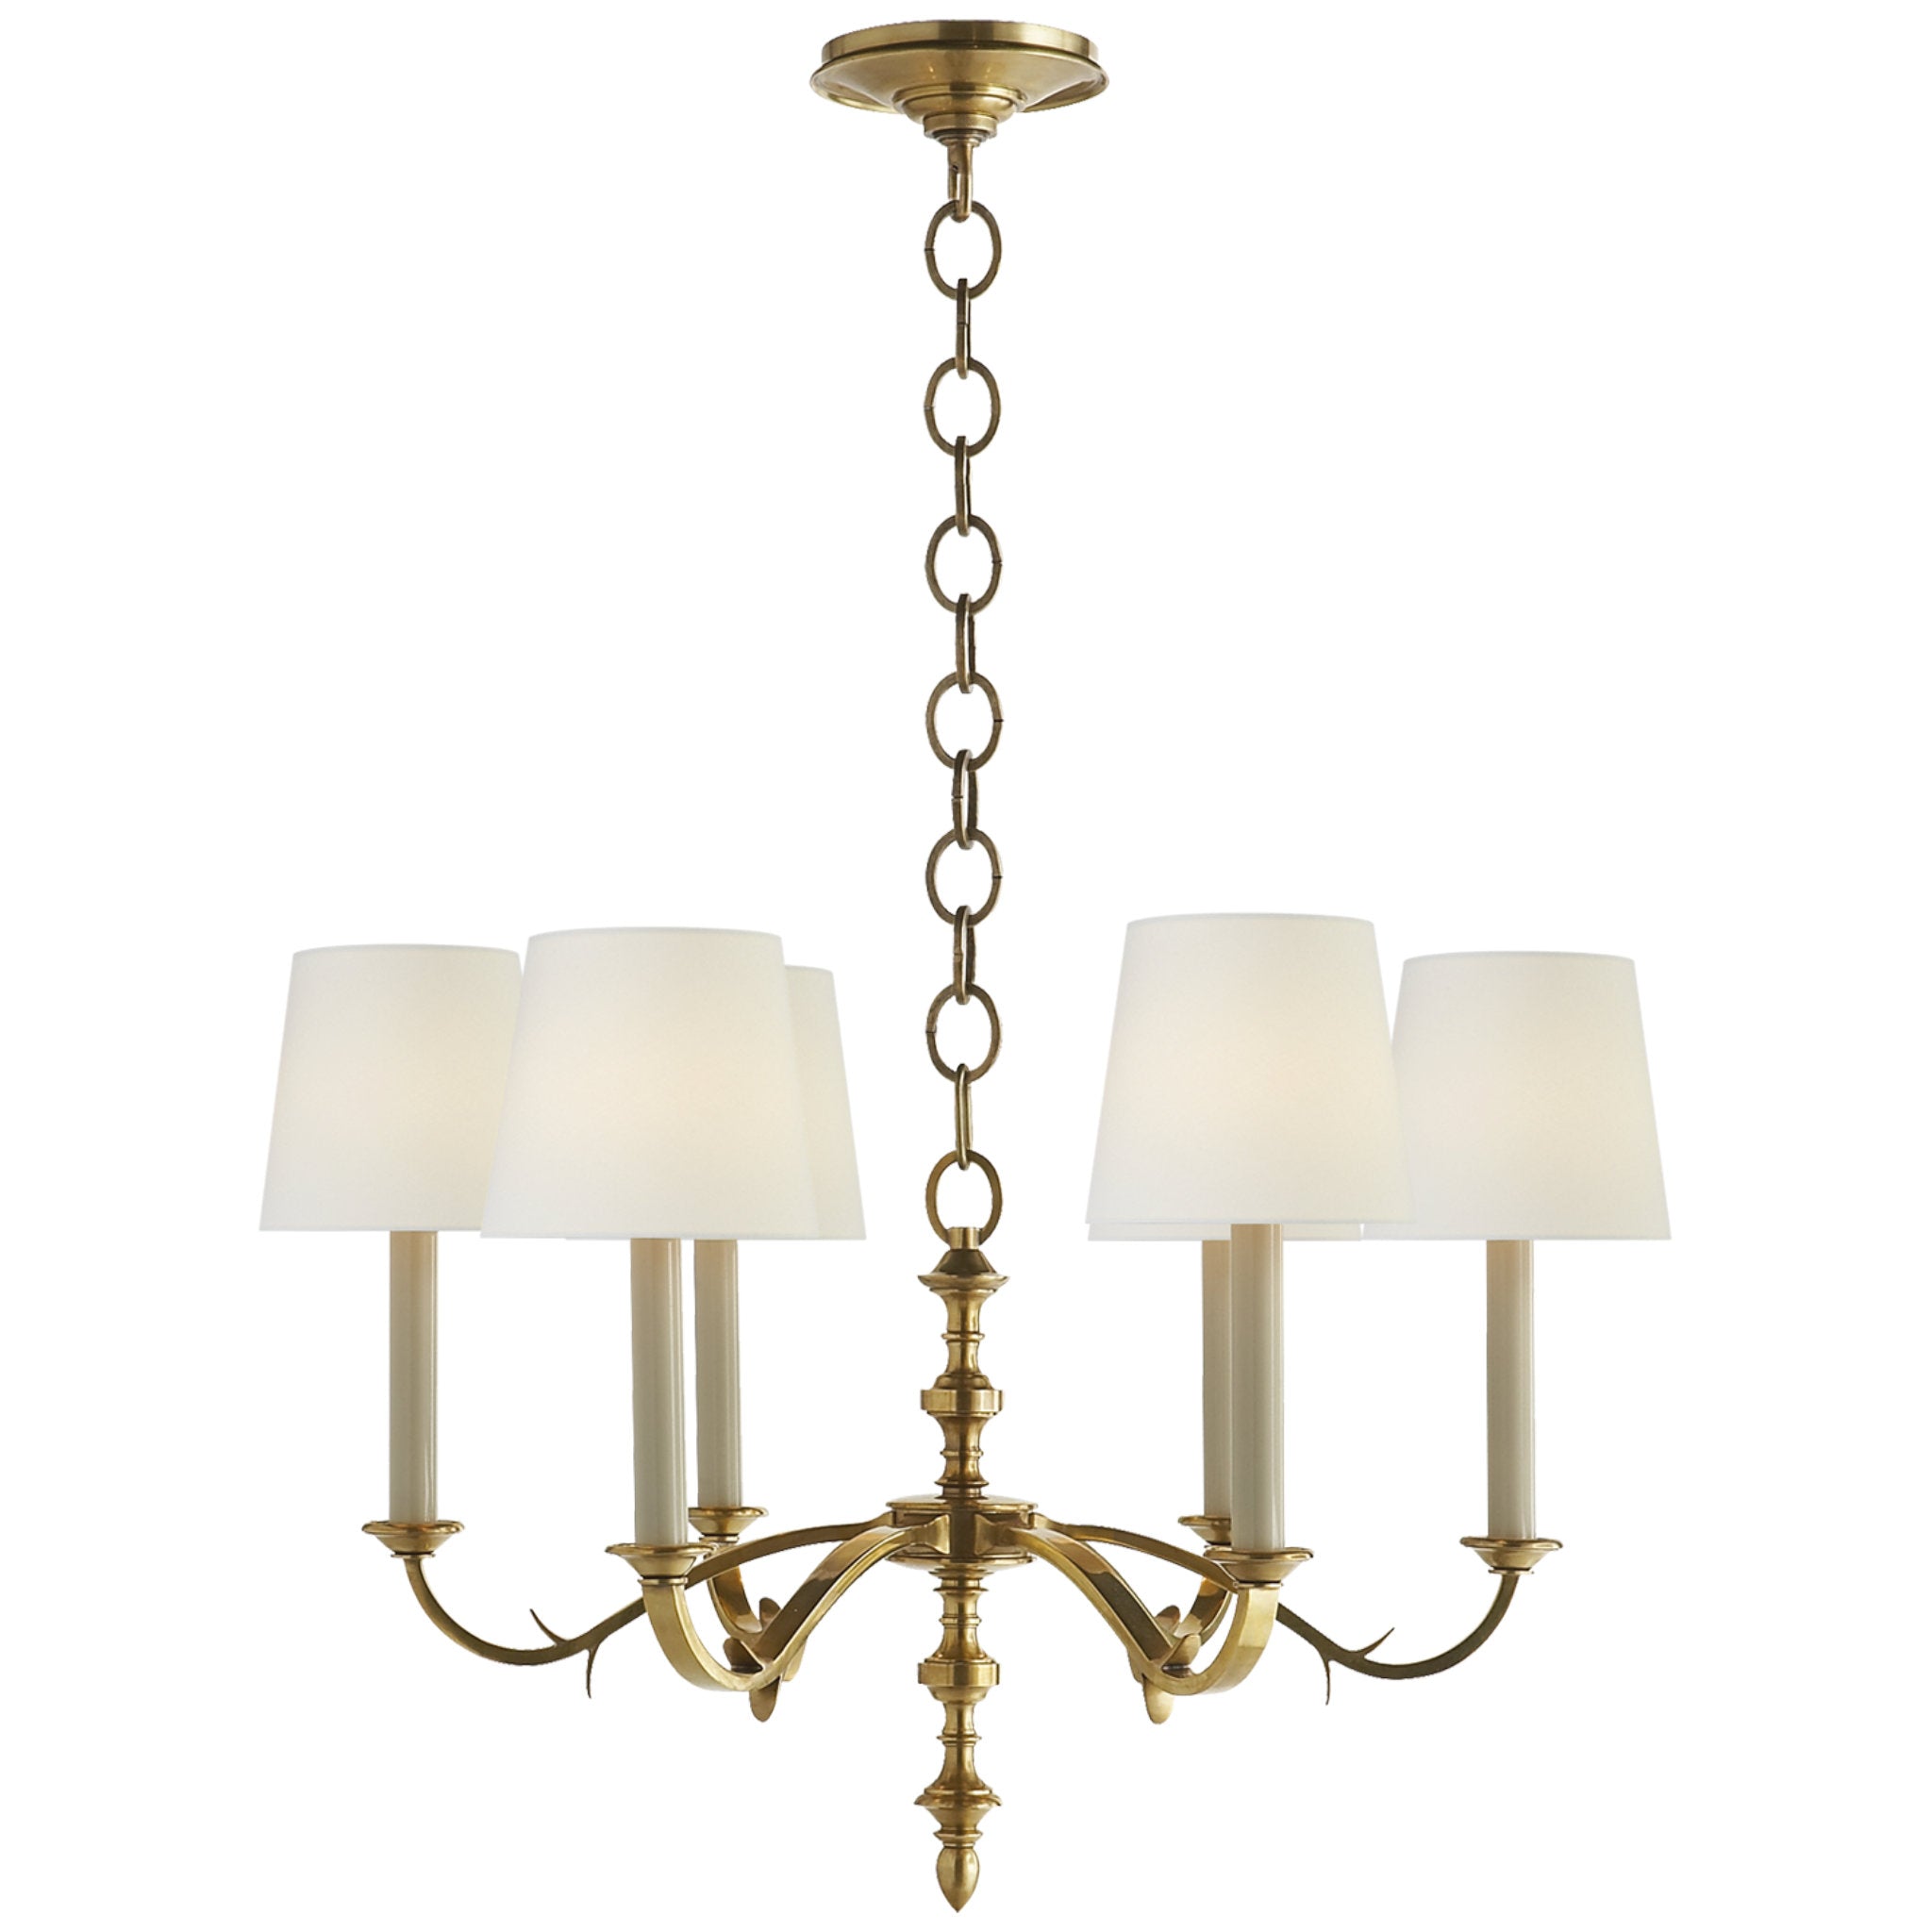 Thomas O'Brien Vendome Large Chandelier in Hand-Rubbed Antique Brass w